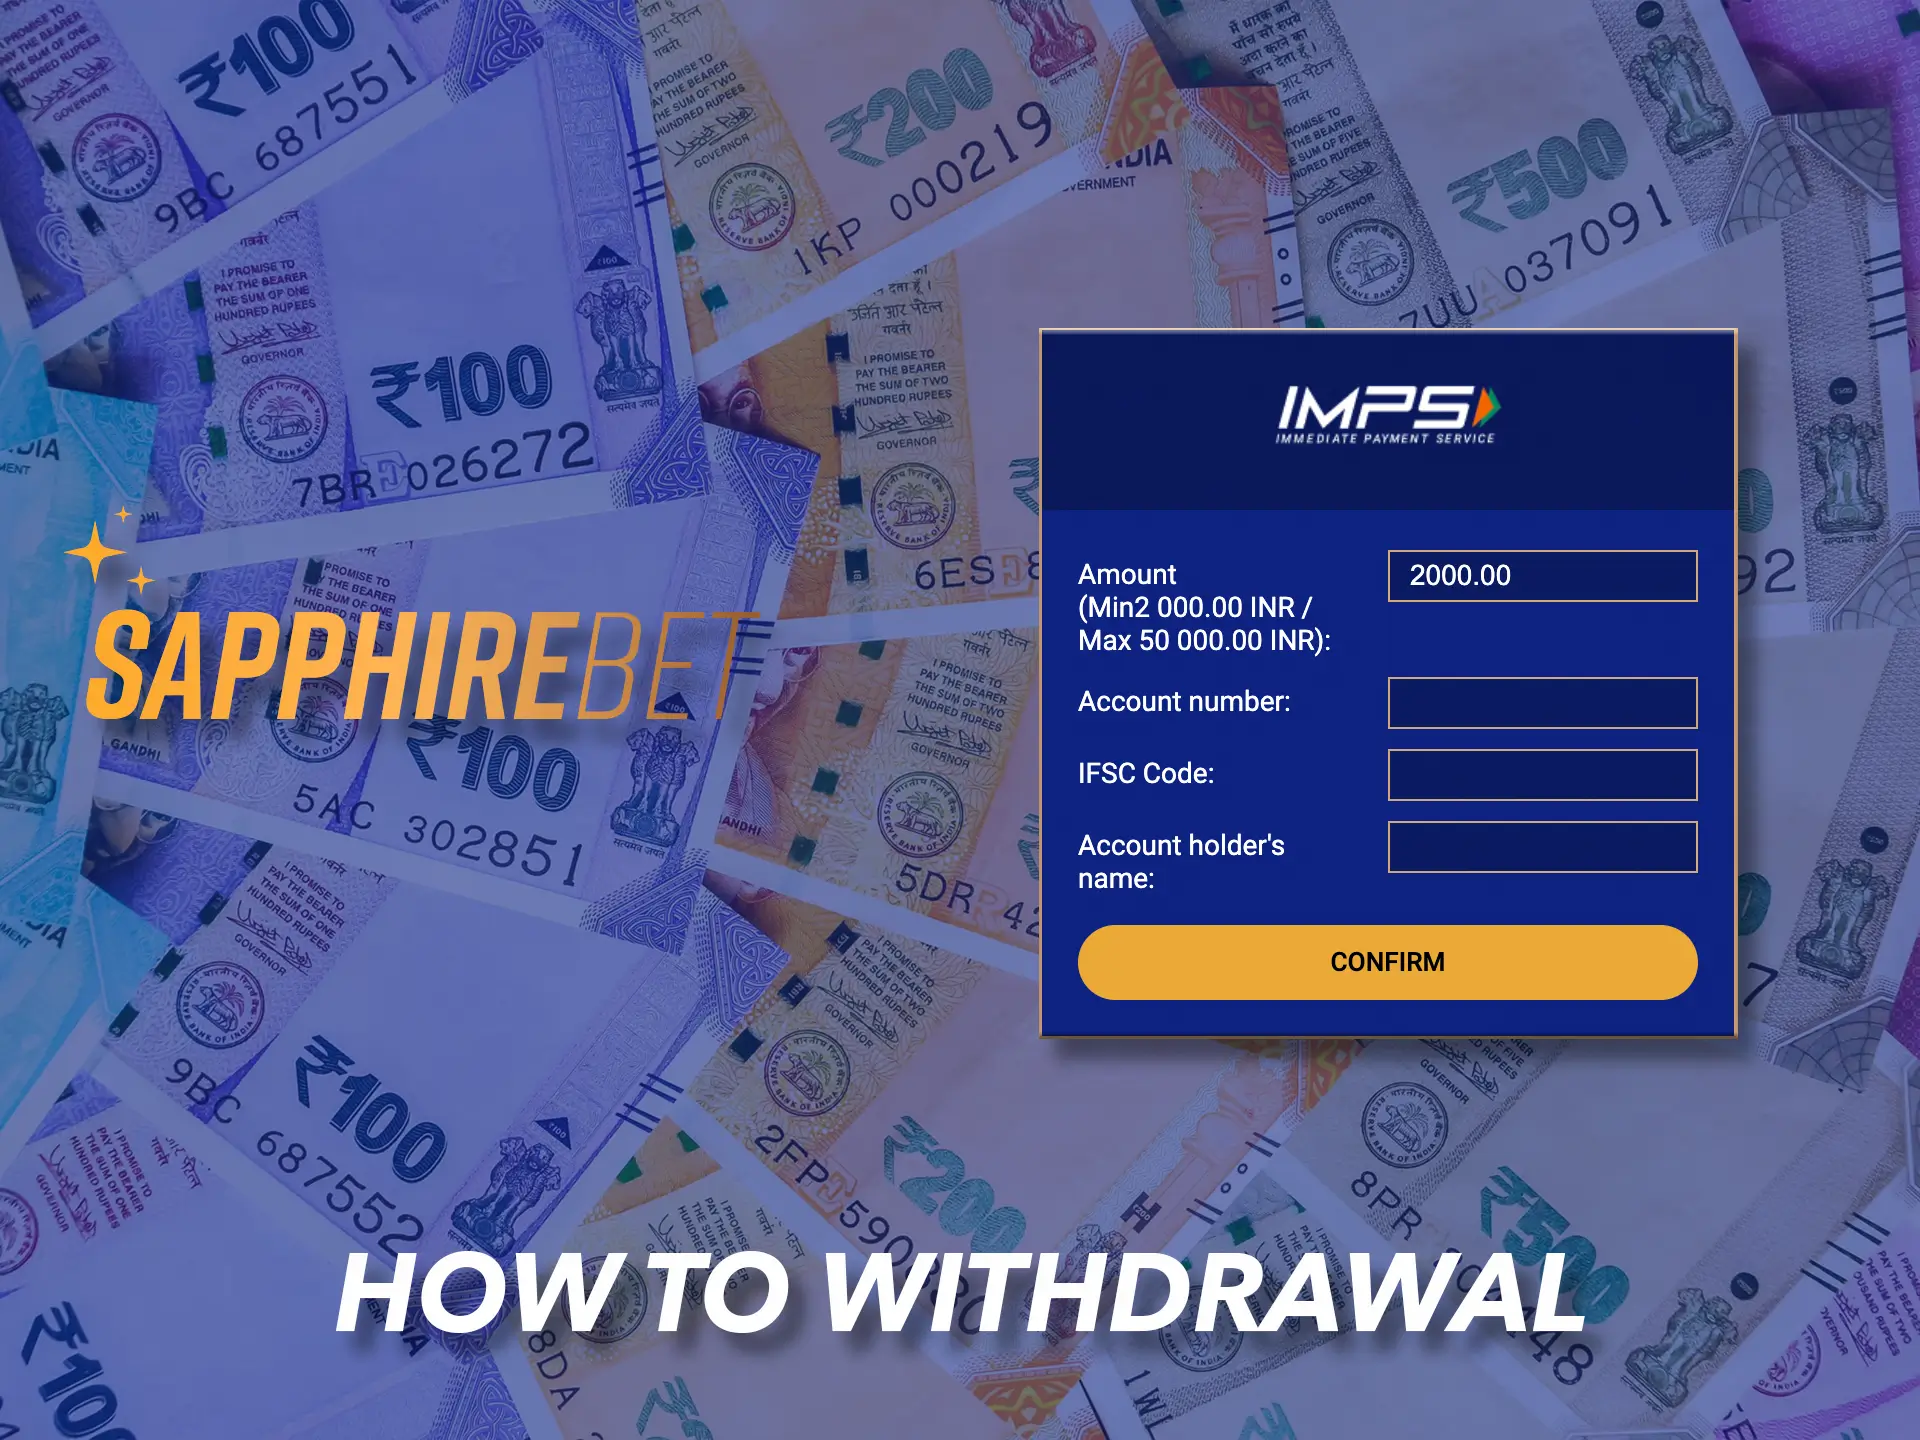 In case of a big win, use the withdrawal facility at Sapphirebet.